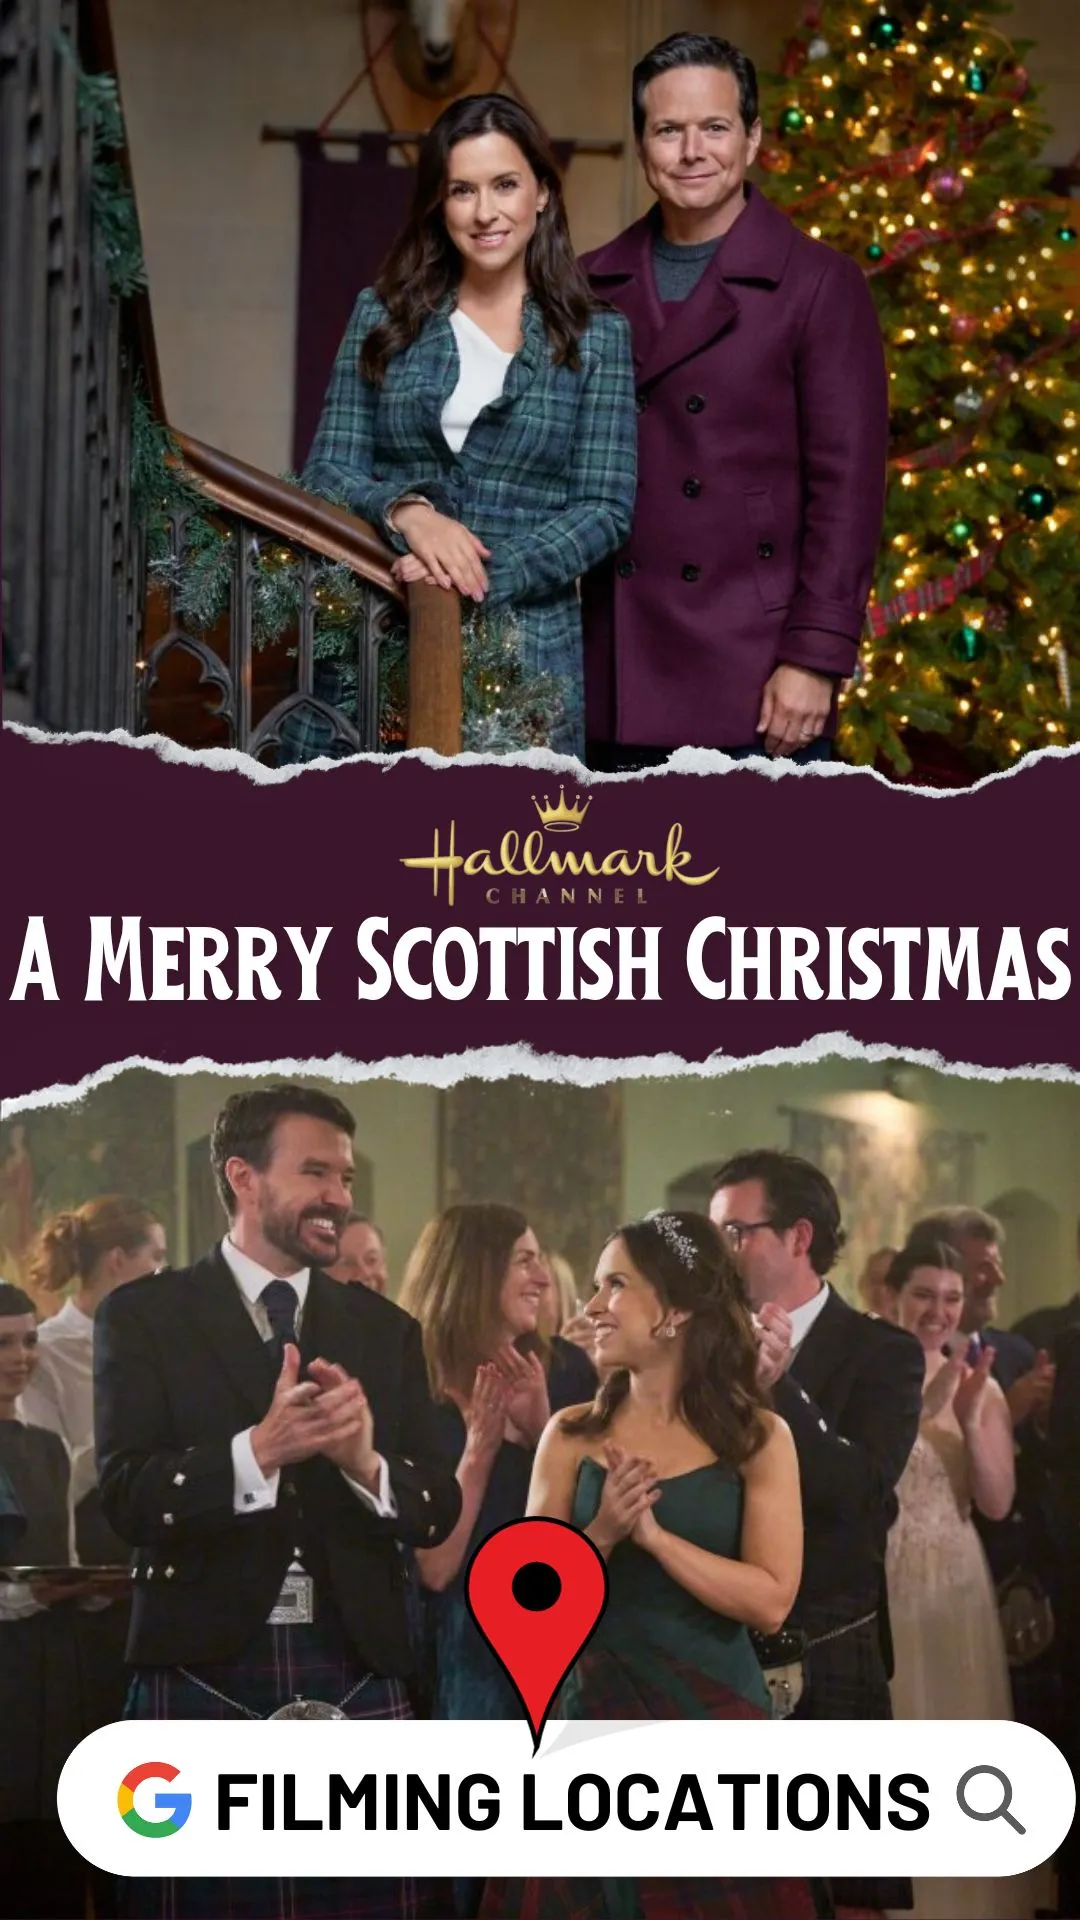 A Merry Scottish Christmas Filming Locations